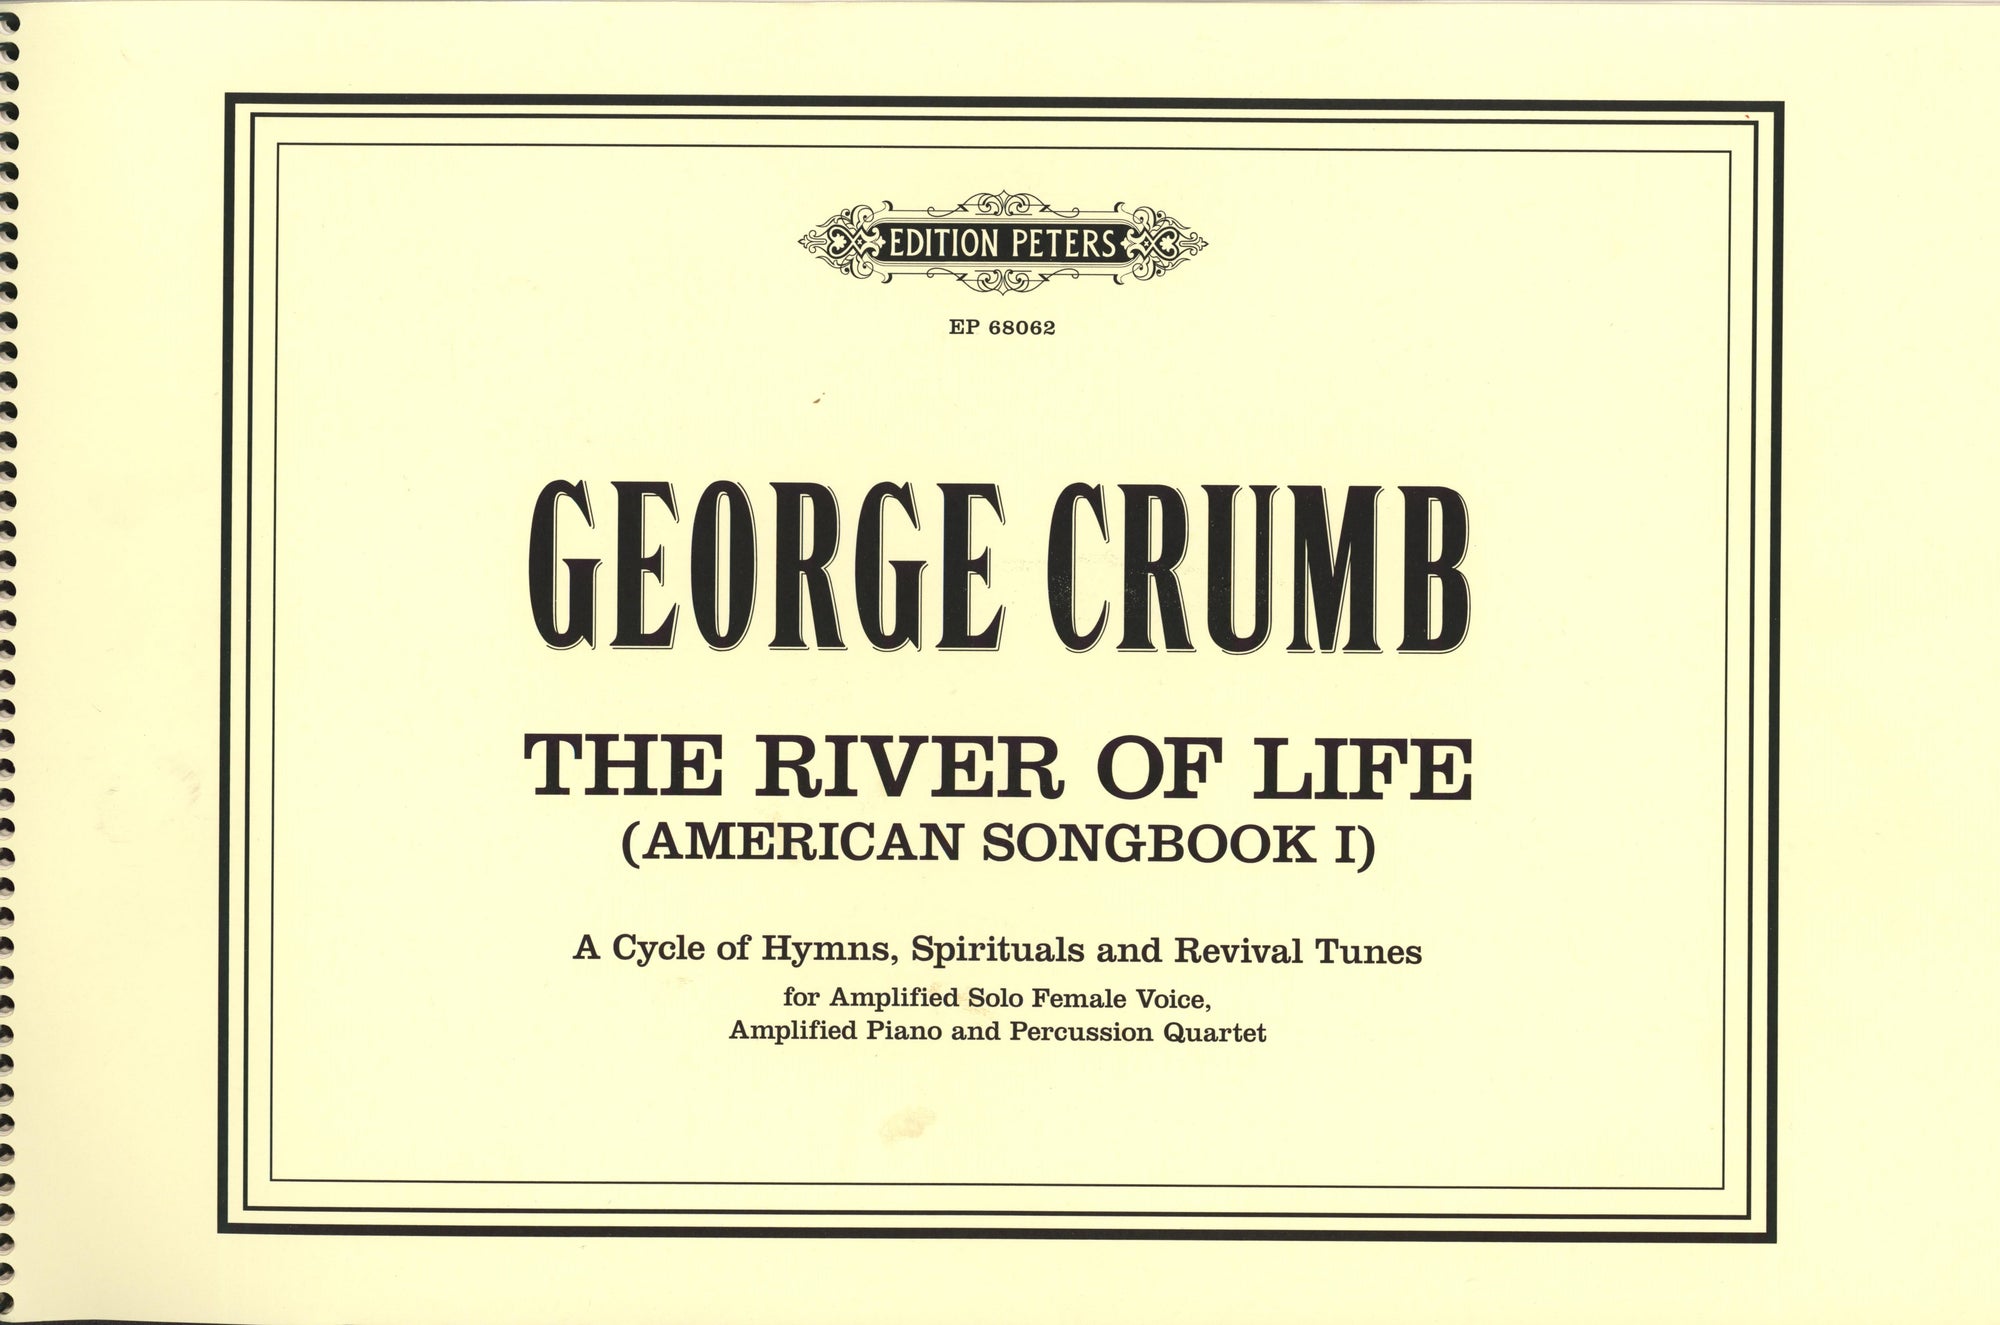 Crumb: The River of Life